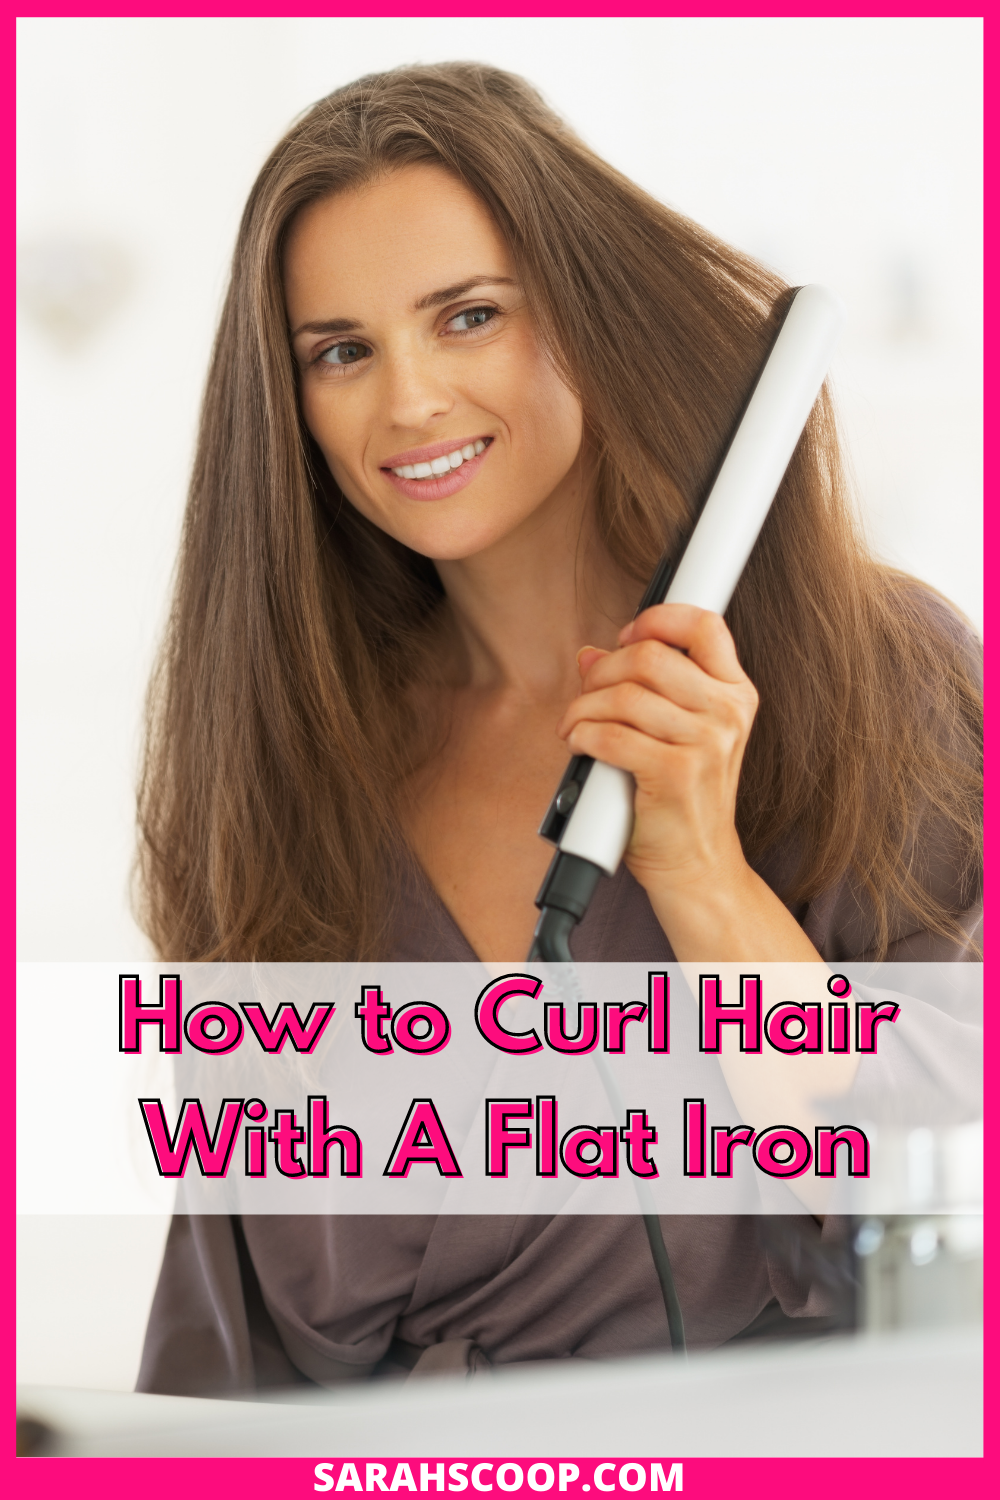 How to Curl Hair With A Flat Iron - Sarah Scoop